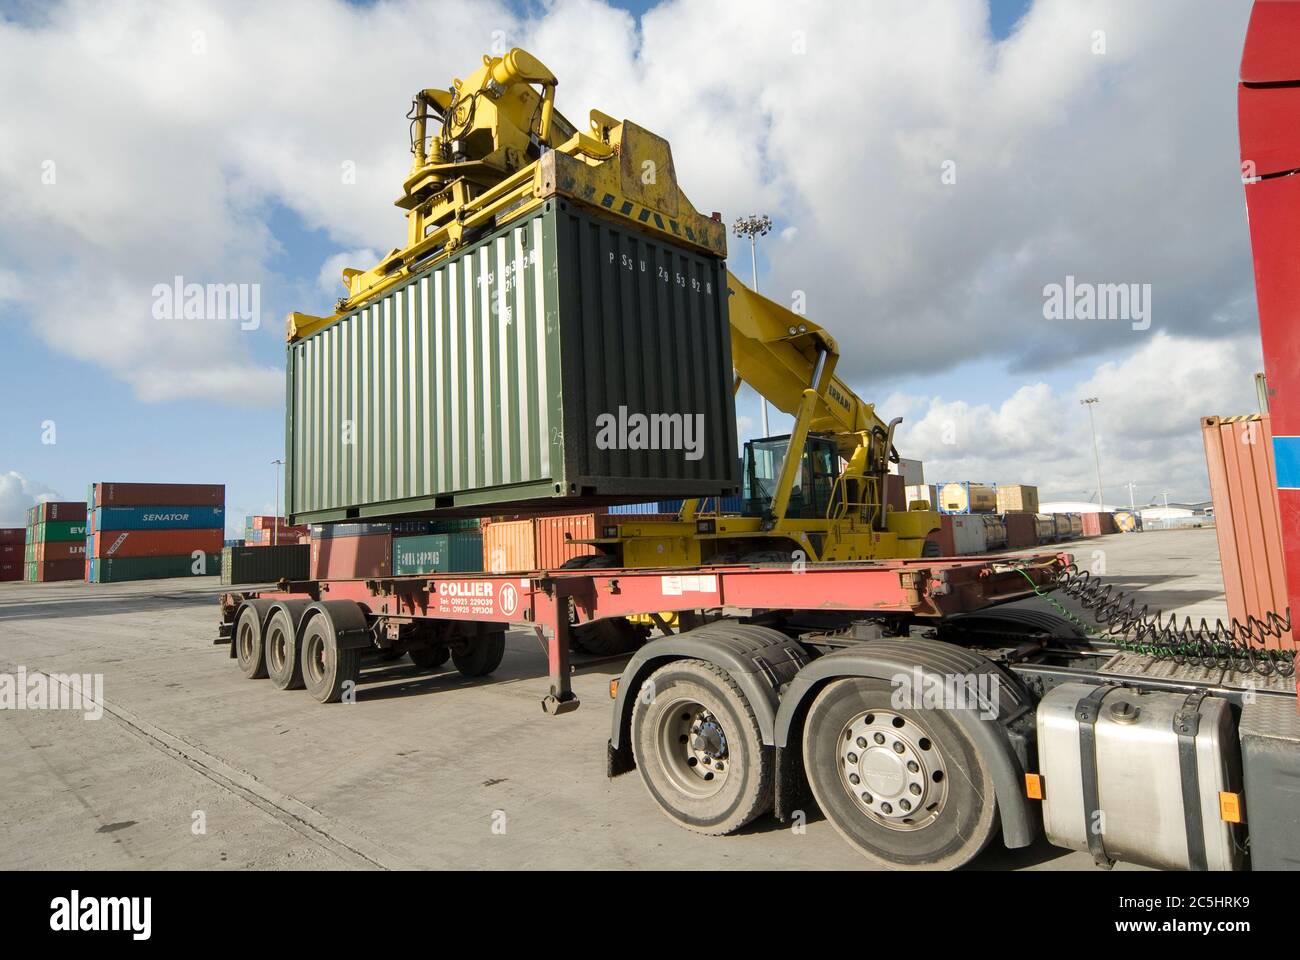 CVS Ferrari reach stacker being used to load a shipping container onto a lorry at Manchester Euroterminal, Trafford Park, Manchester, England. Stock Photo